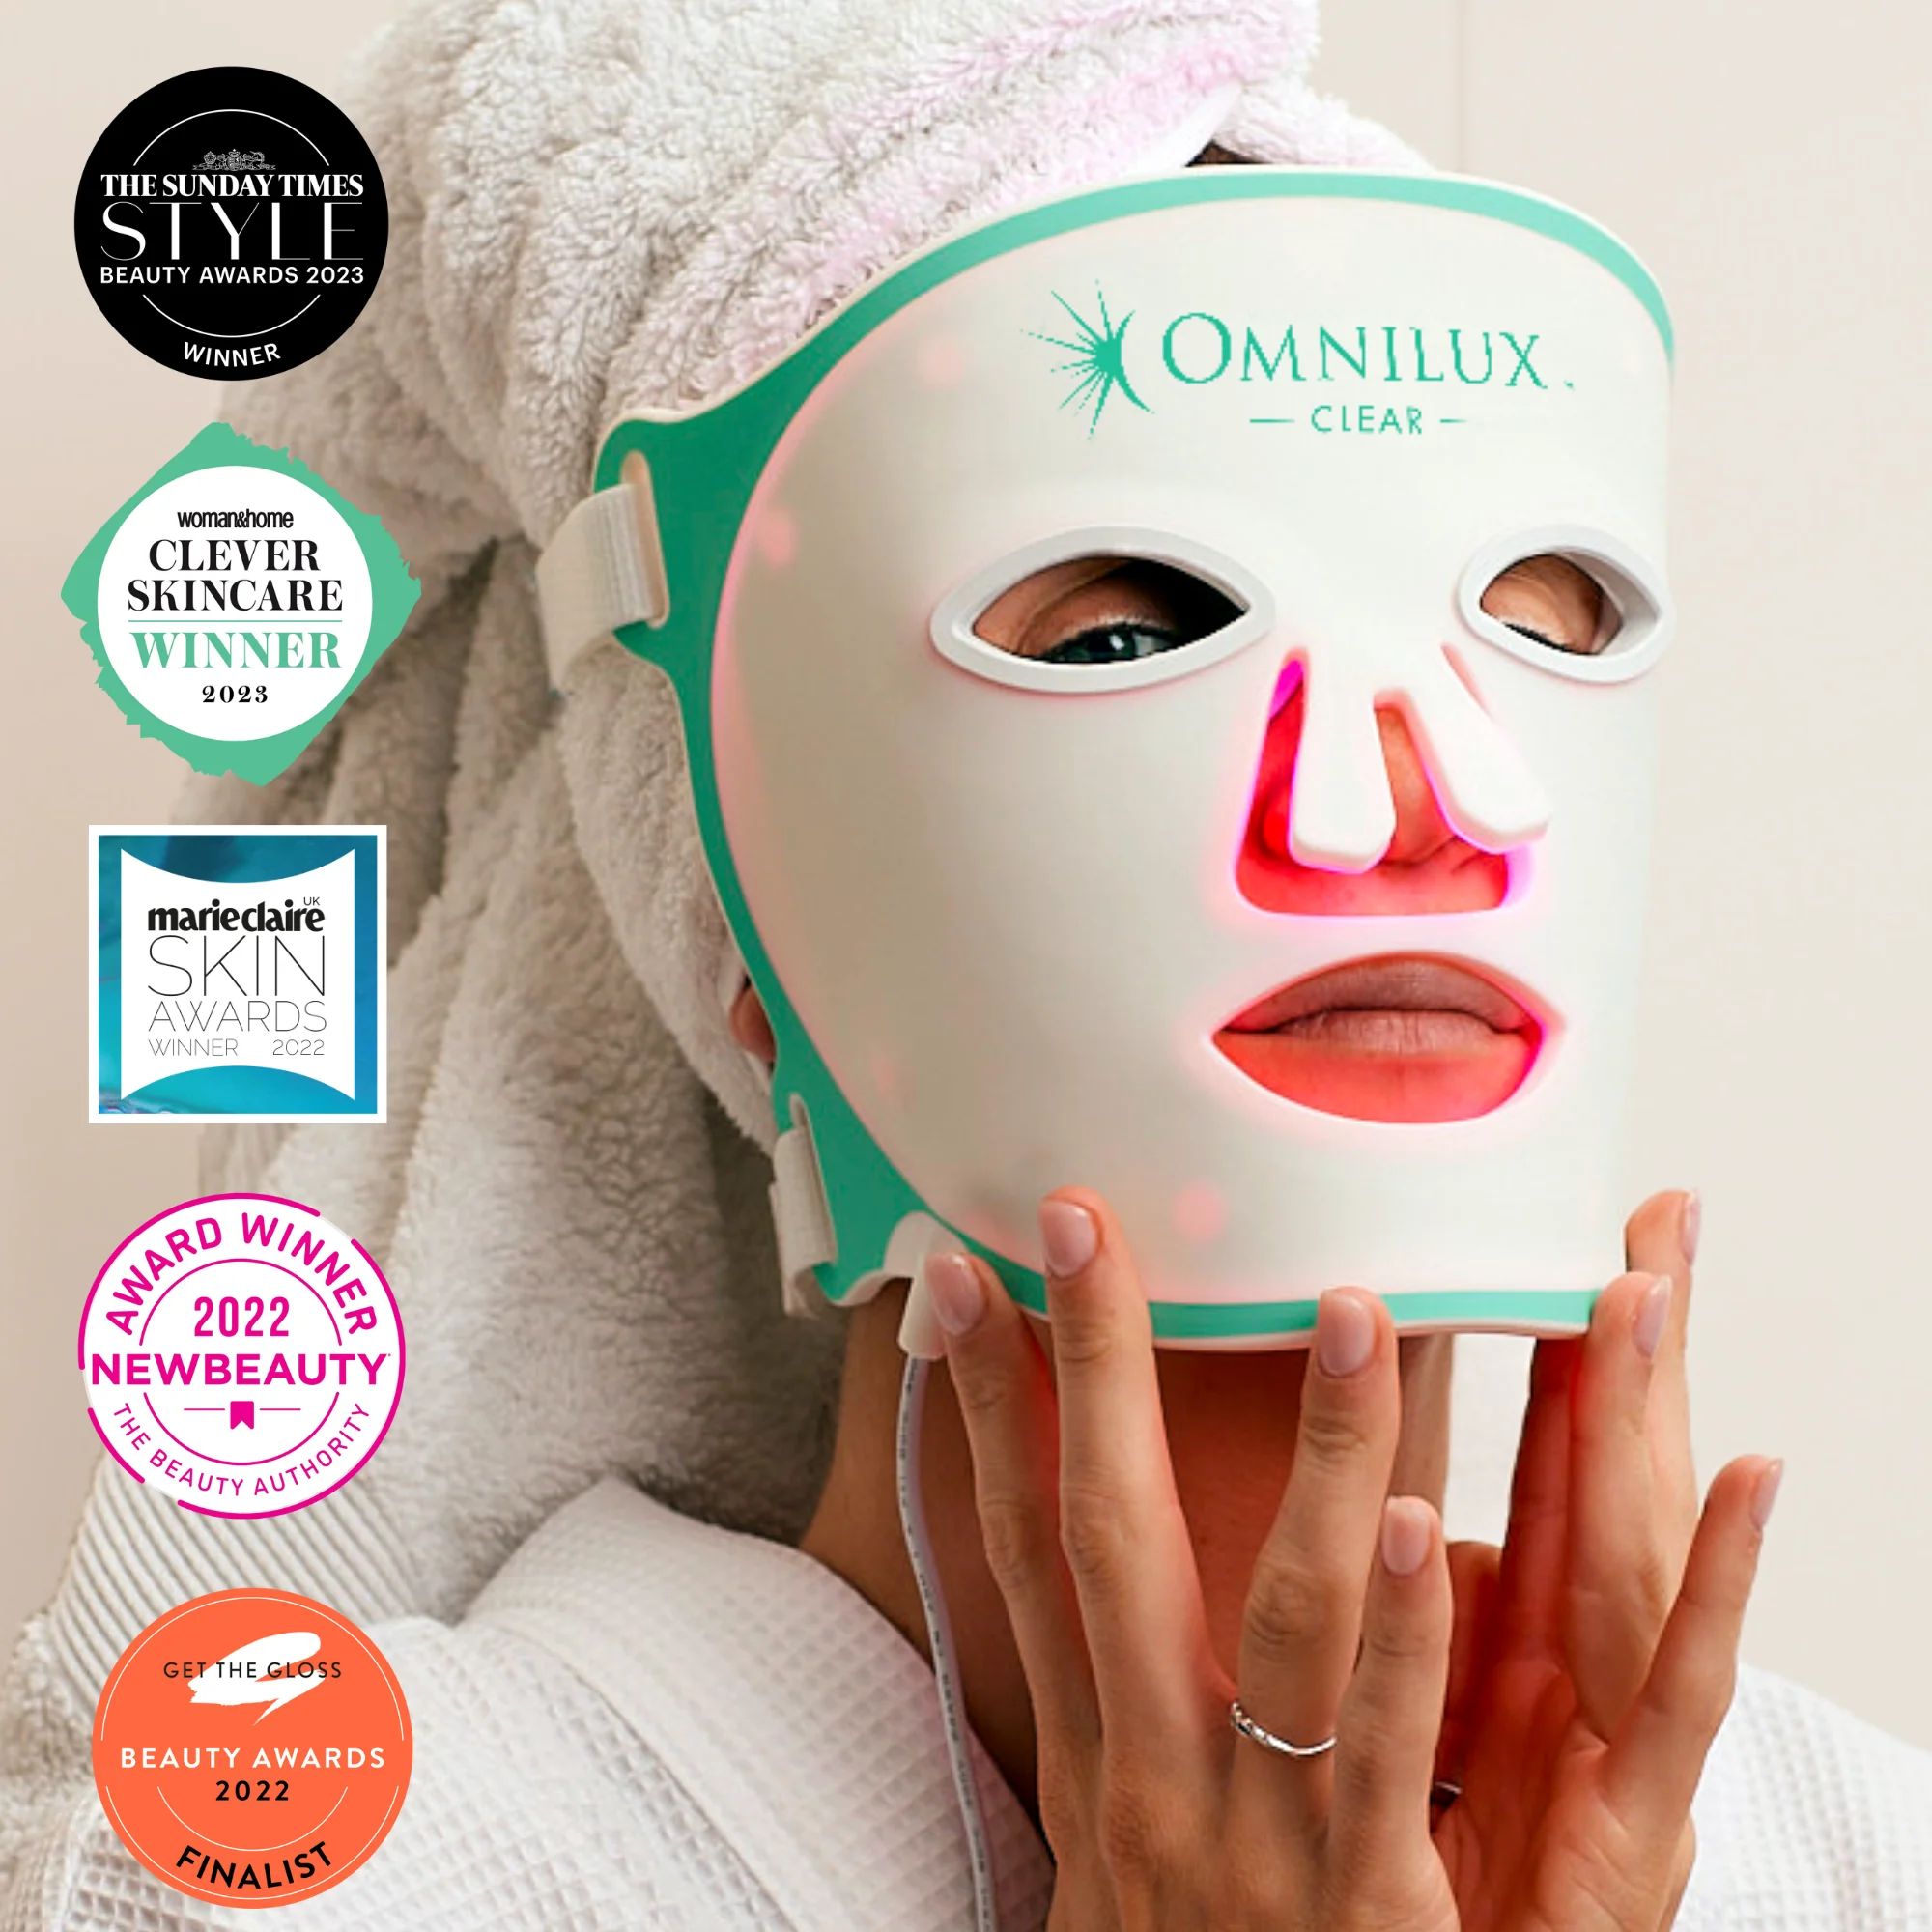 Omnilux Contour Face
            
                          
               
 4.8 Rated 4.8 out o... | Omnilux LED